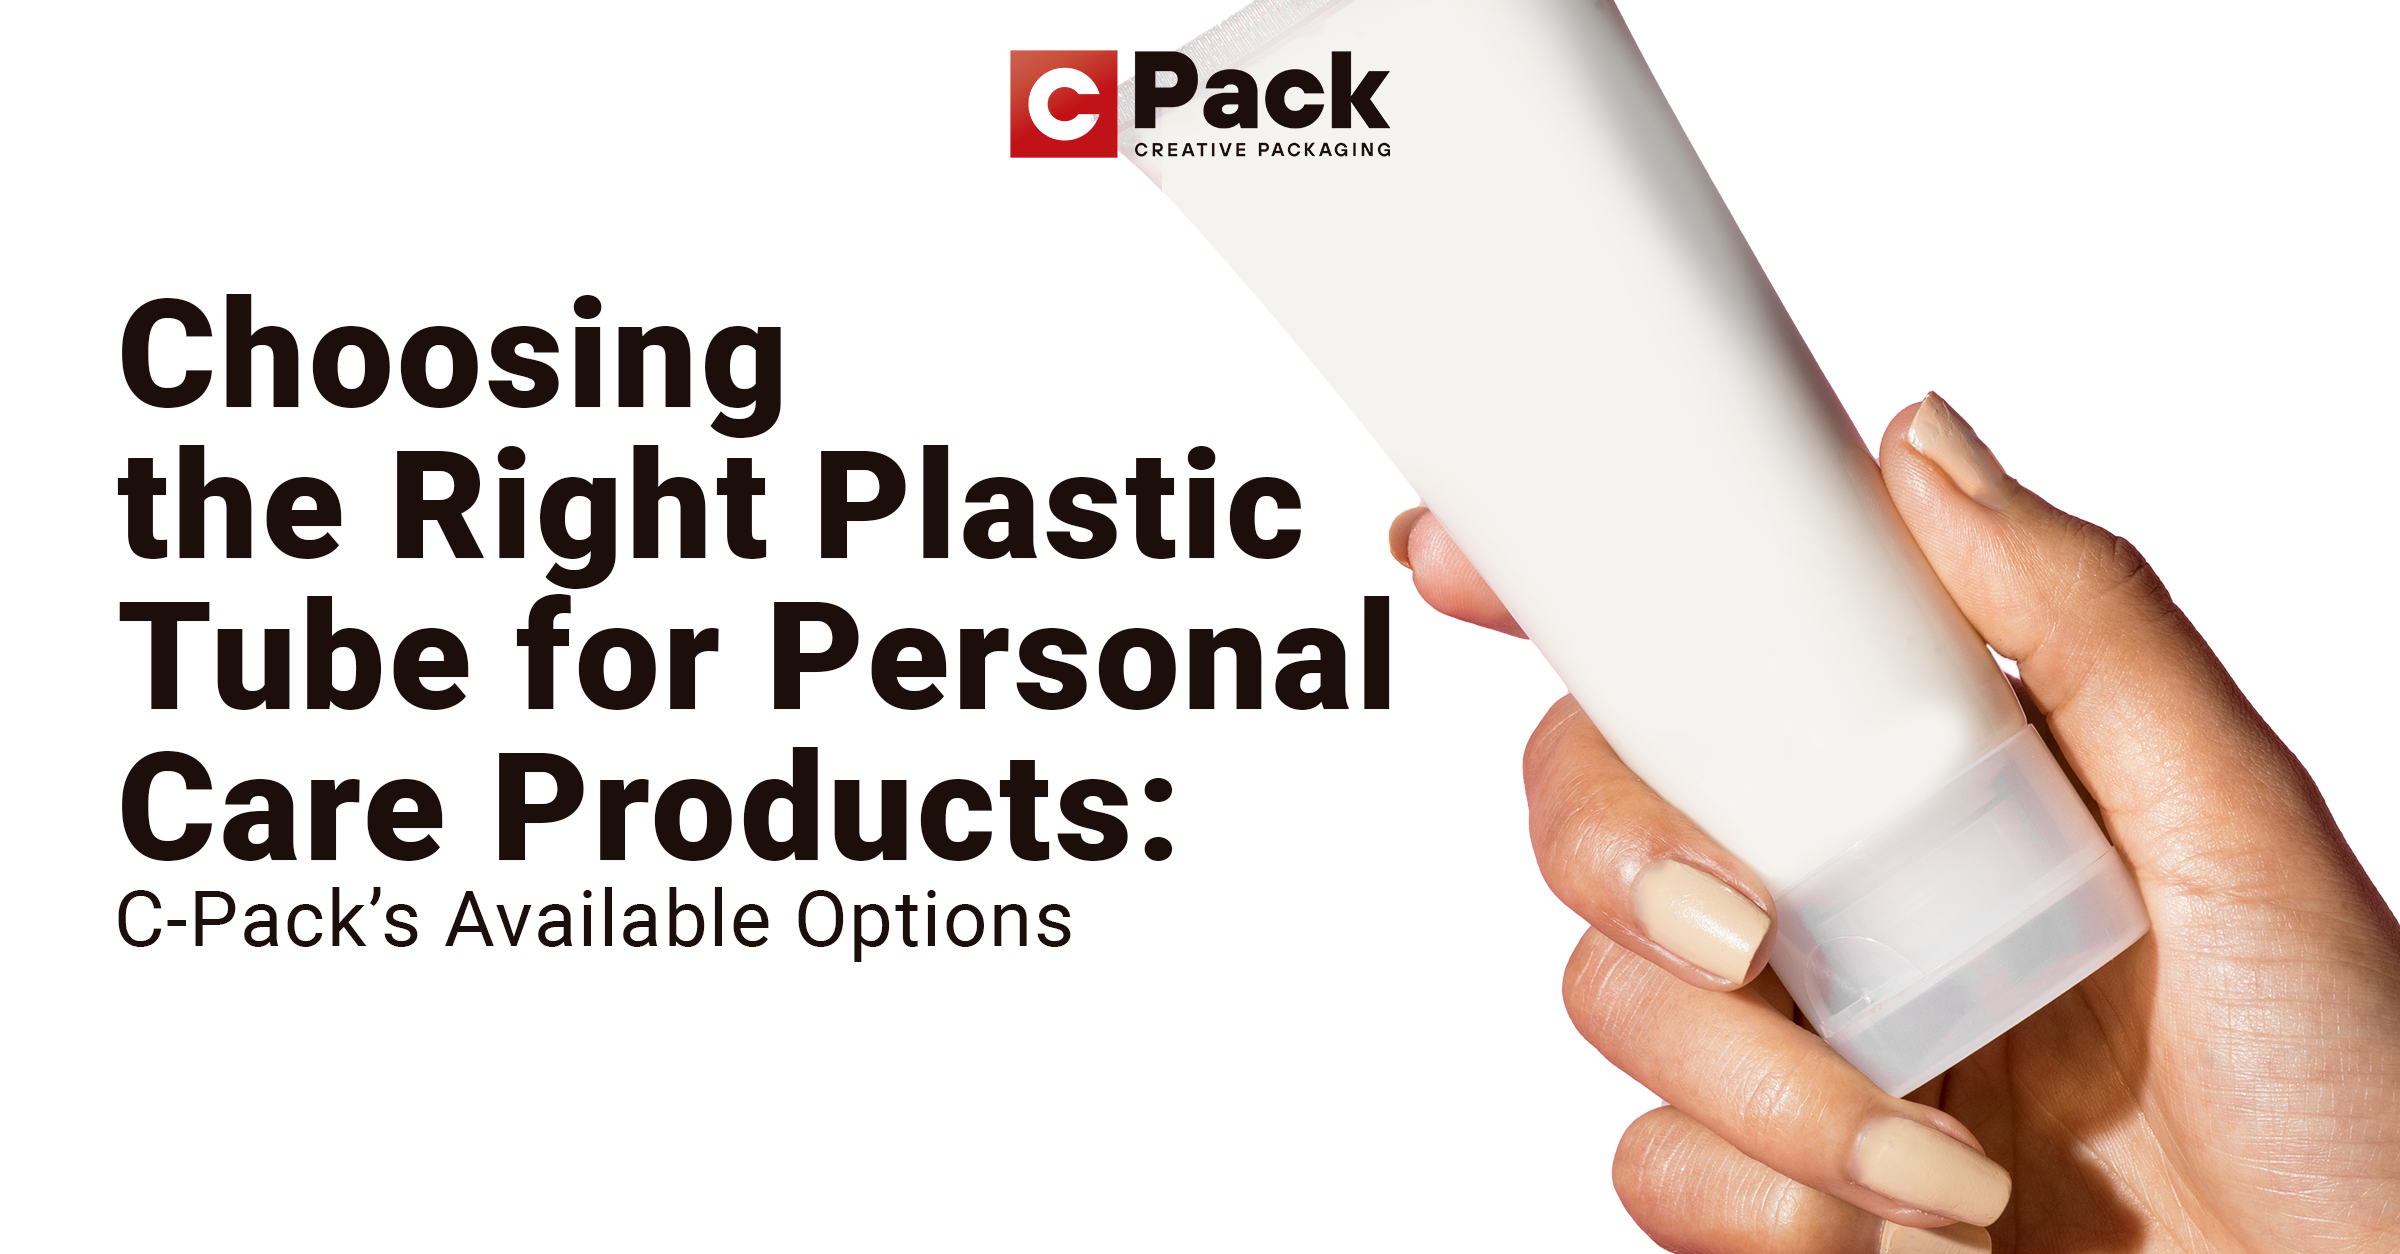 Image showcasing a variety of plastic tube options for personal care products offered by C-Pack.